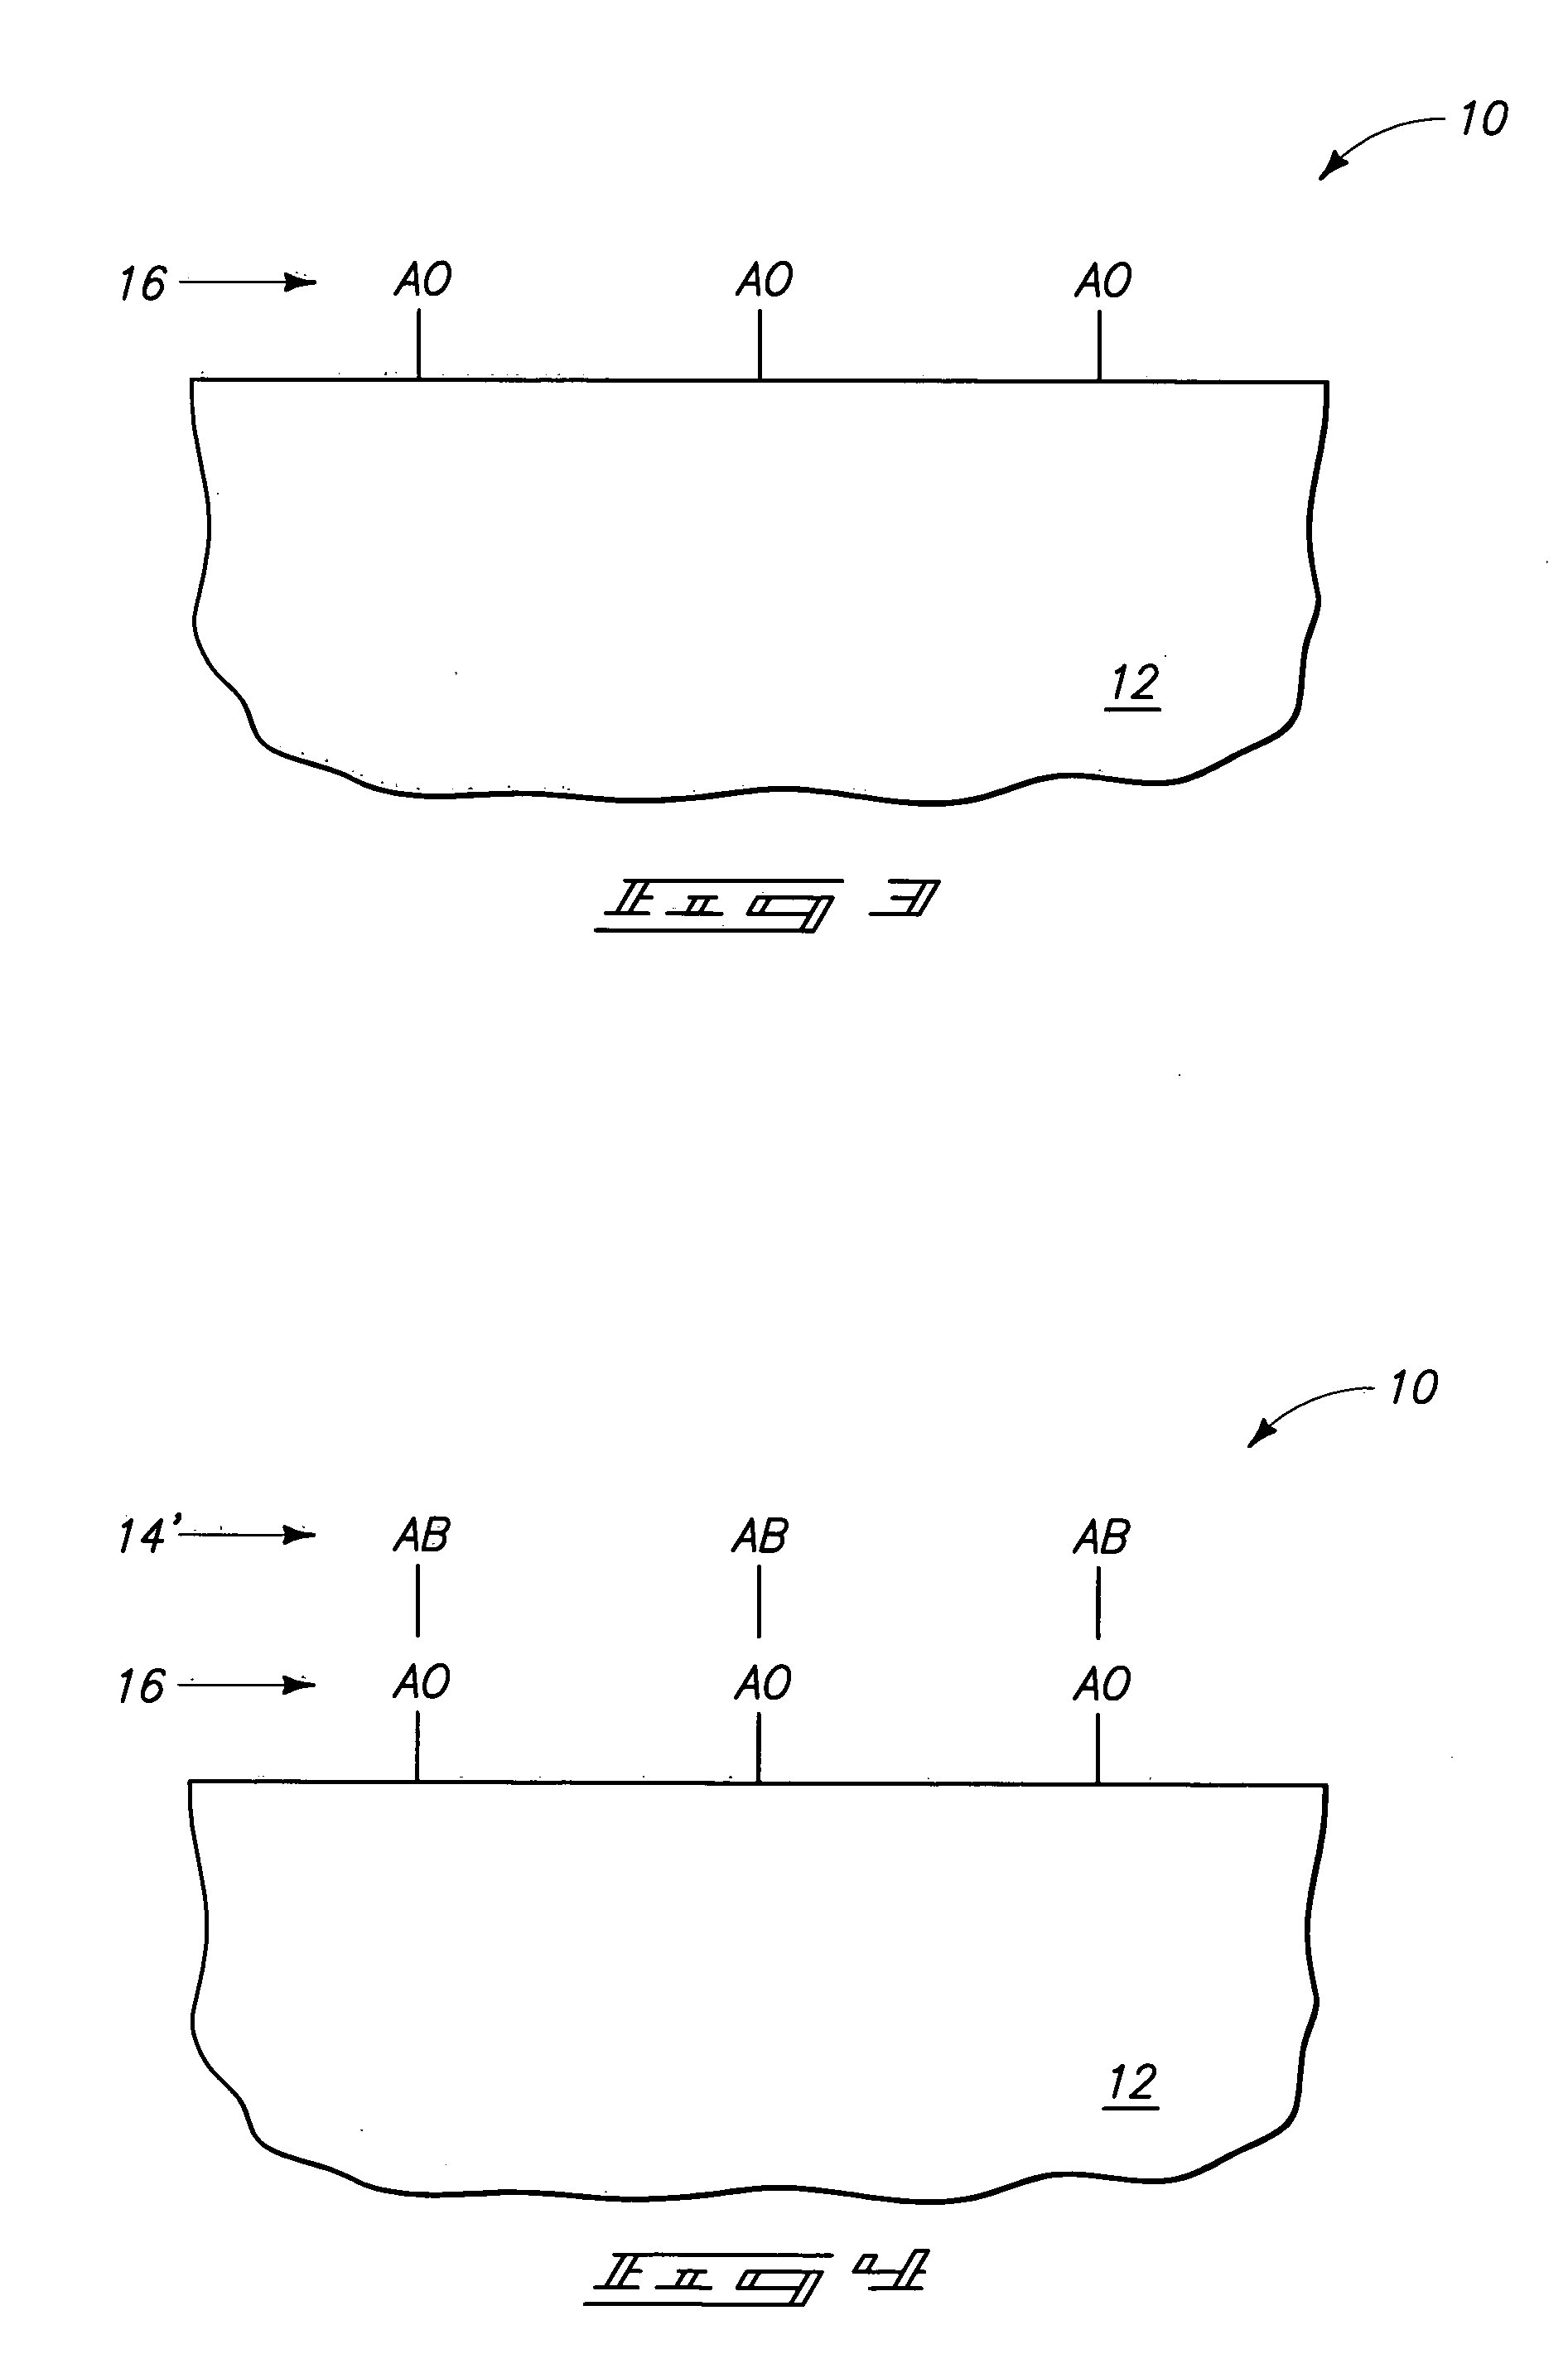 Atomic layer deposition method of depositing an oxide on a substrate